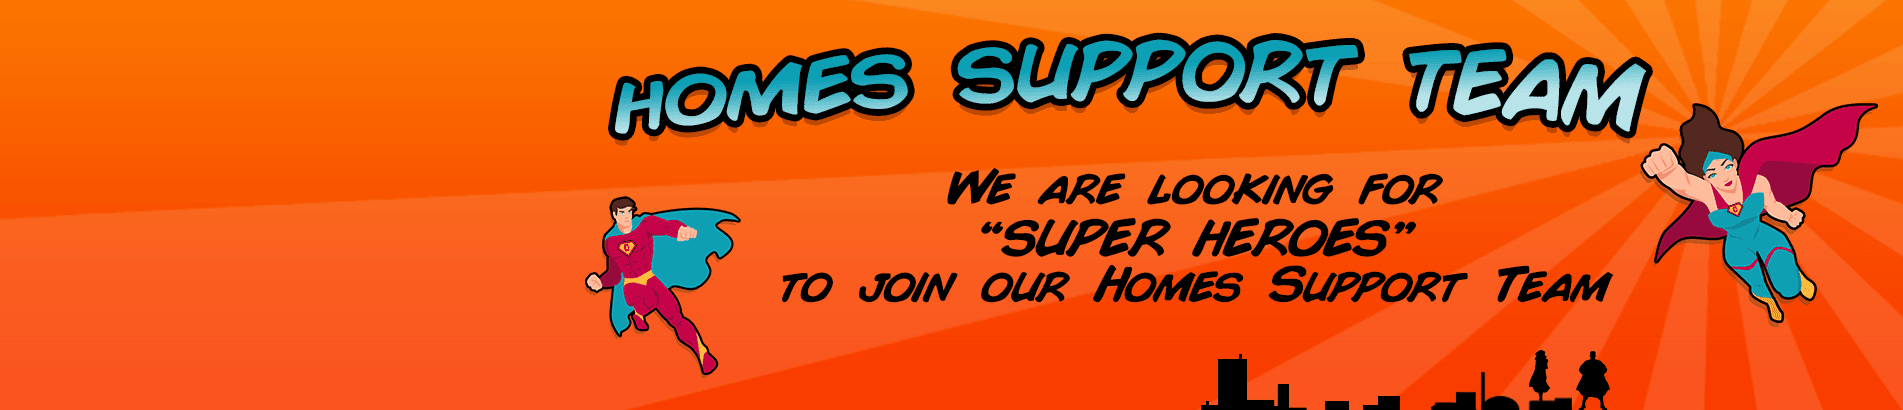 Home Support Roles